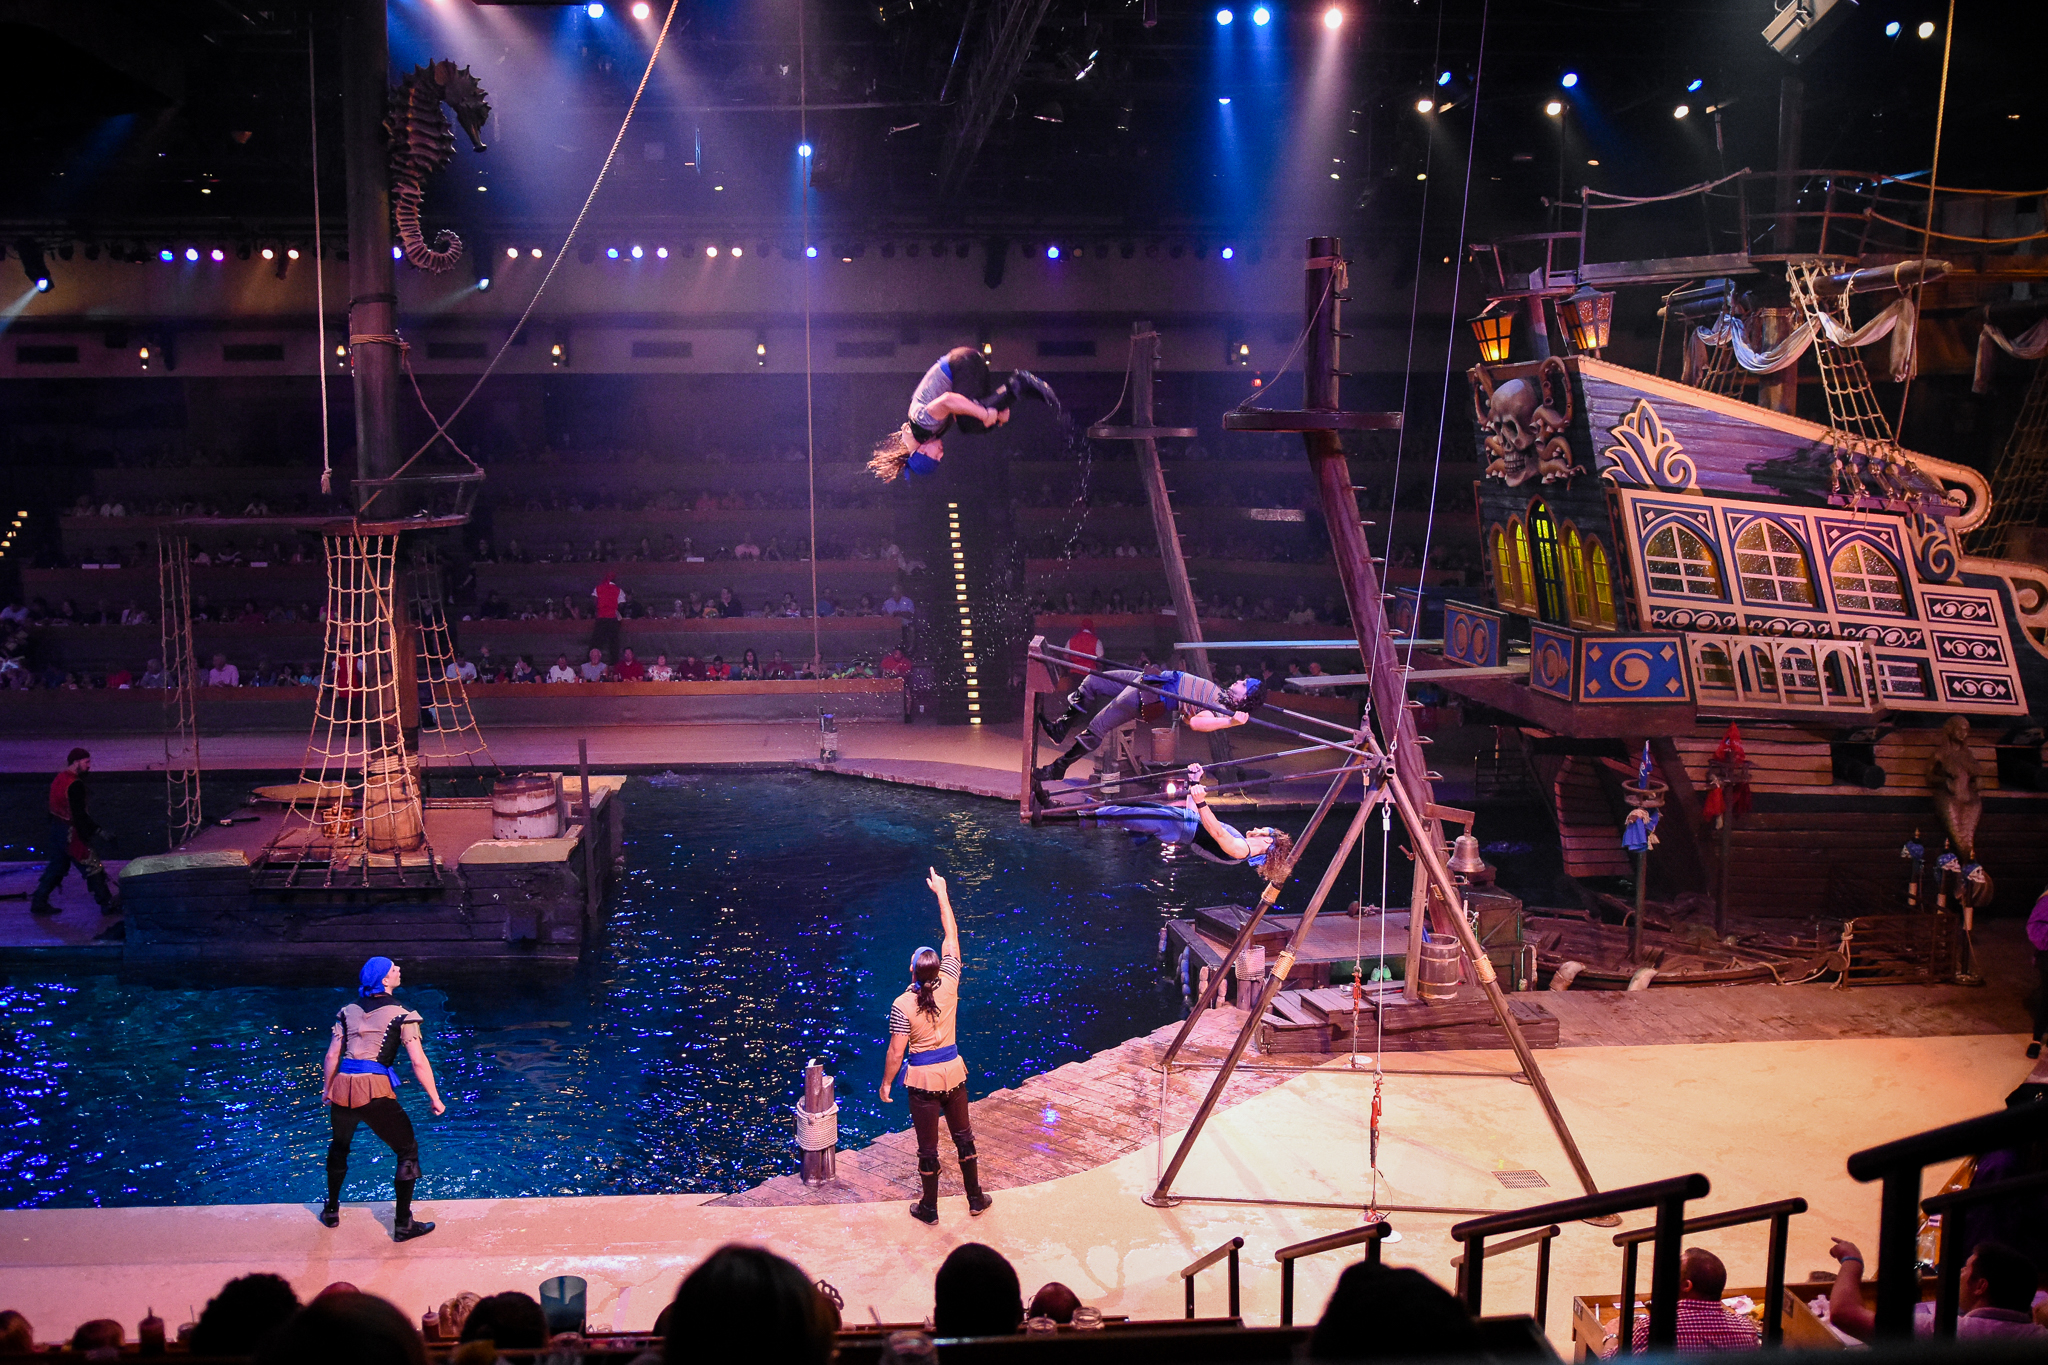 Pirate themed dinner show featuring acrobatics and stunts.